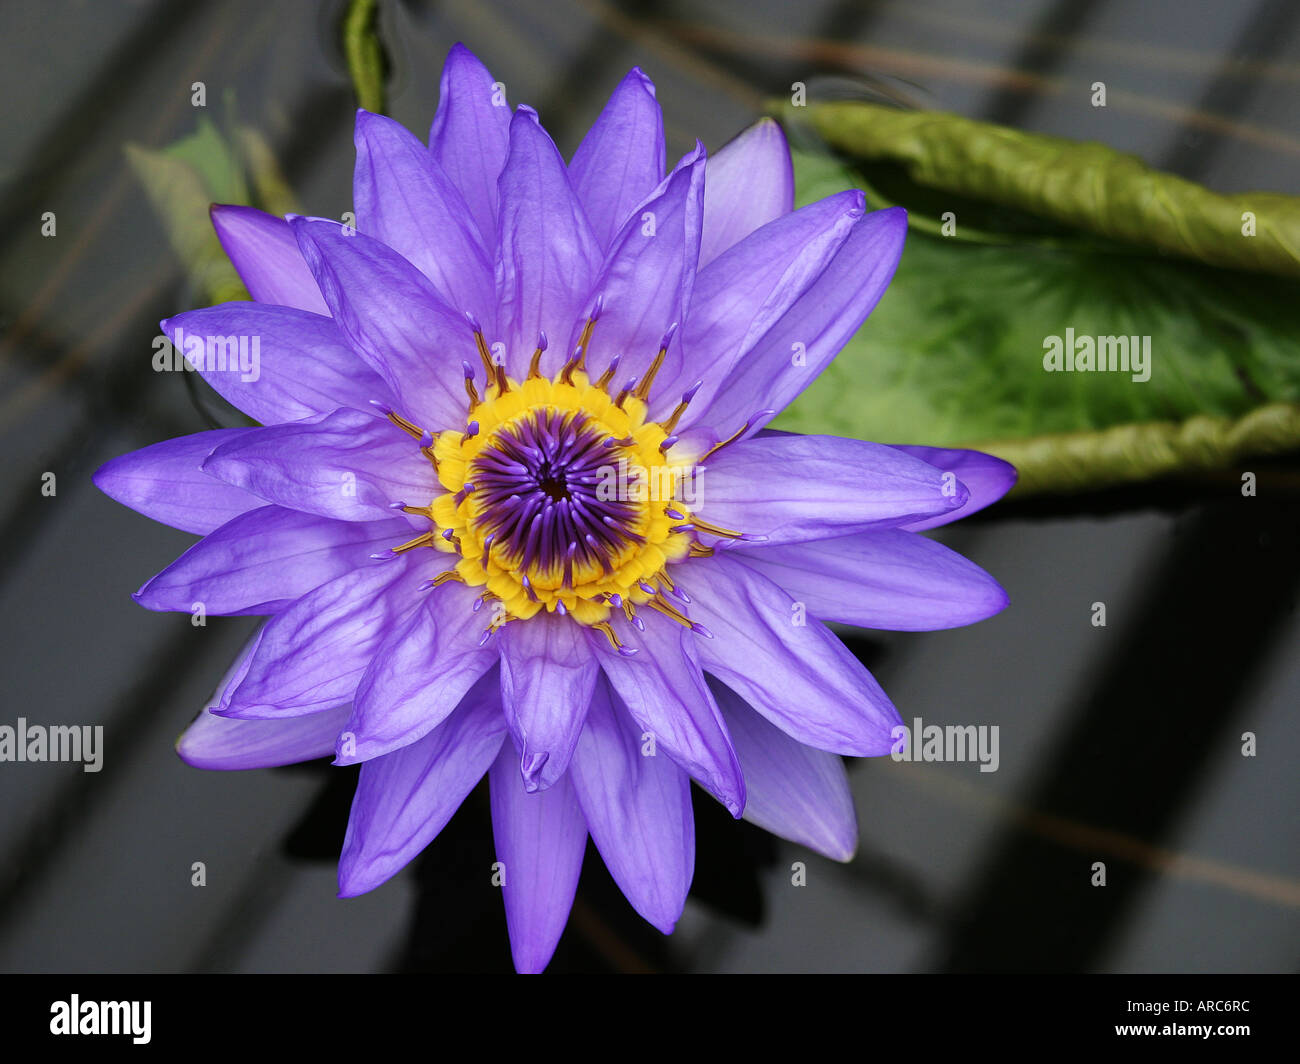 A Nymphaea water lily. Stock Photo